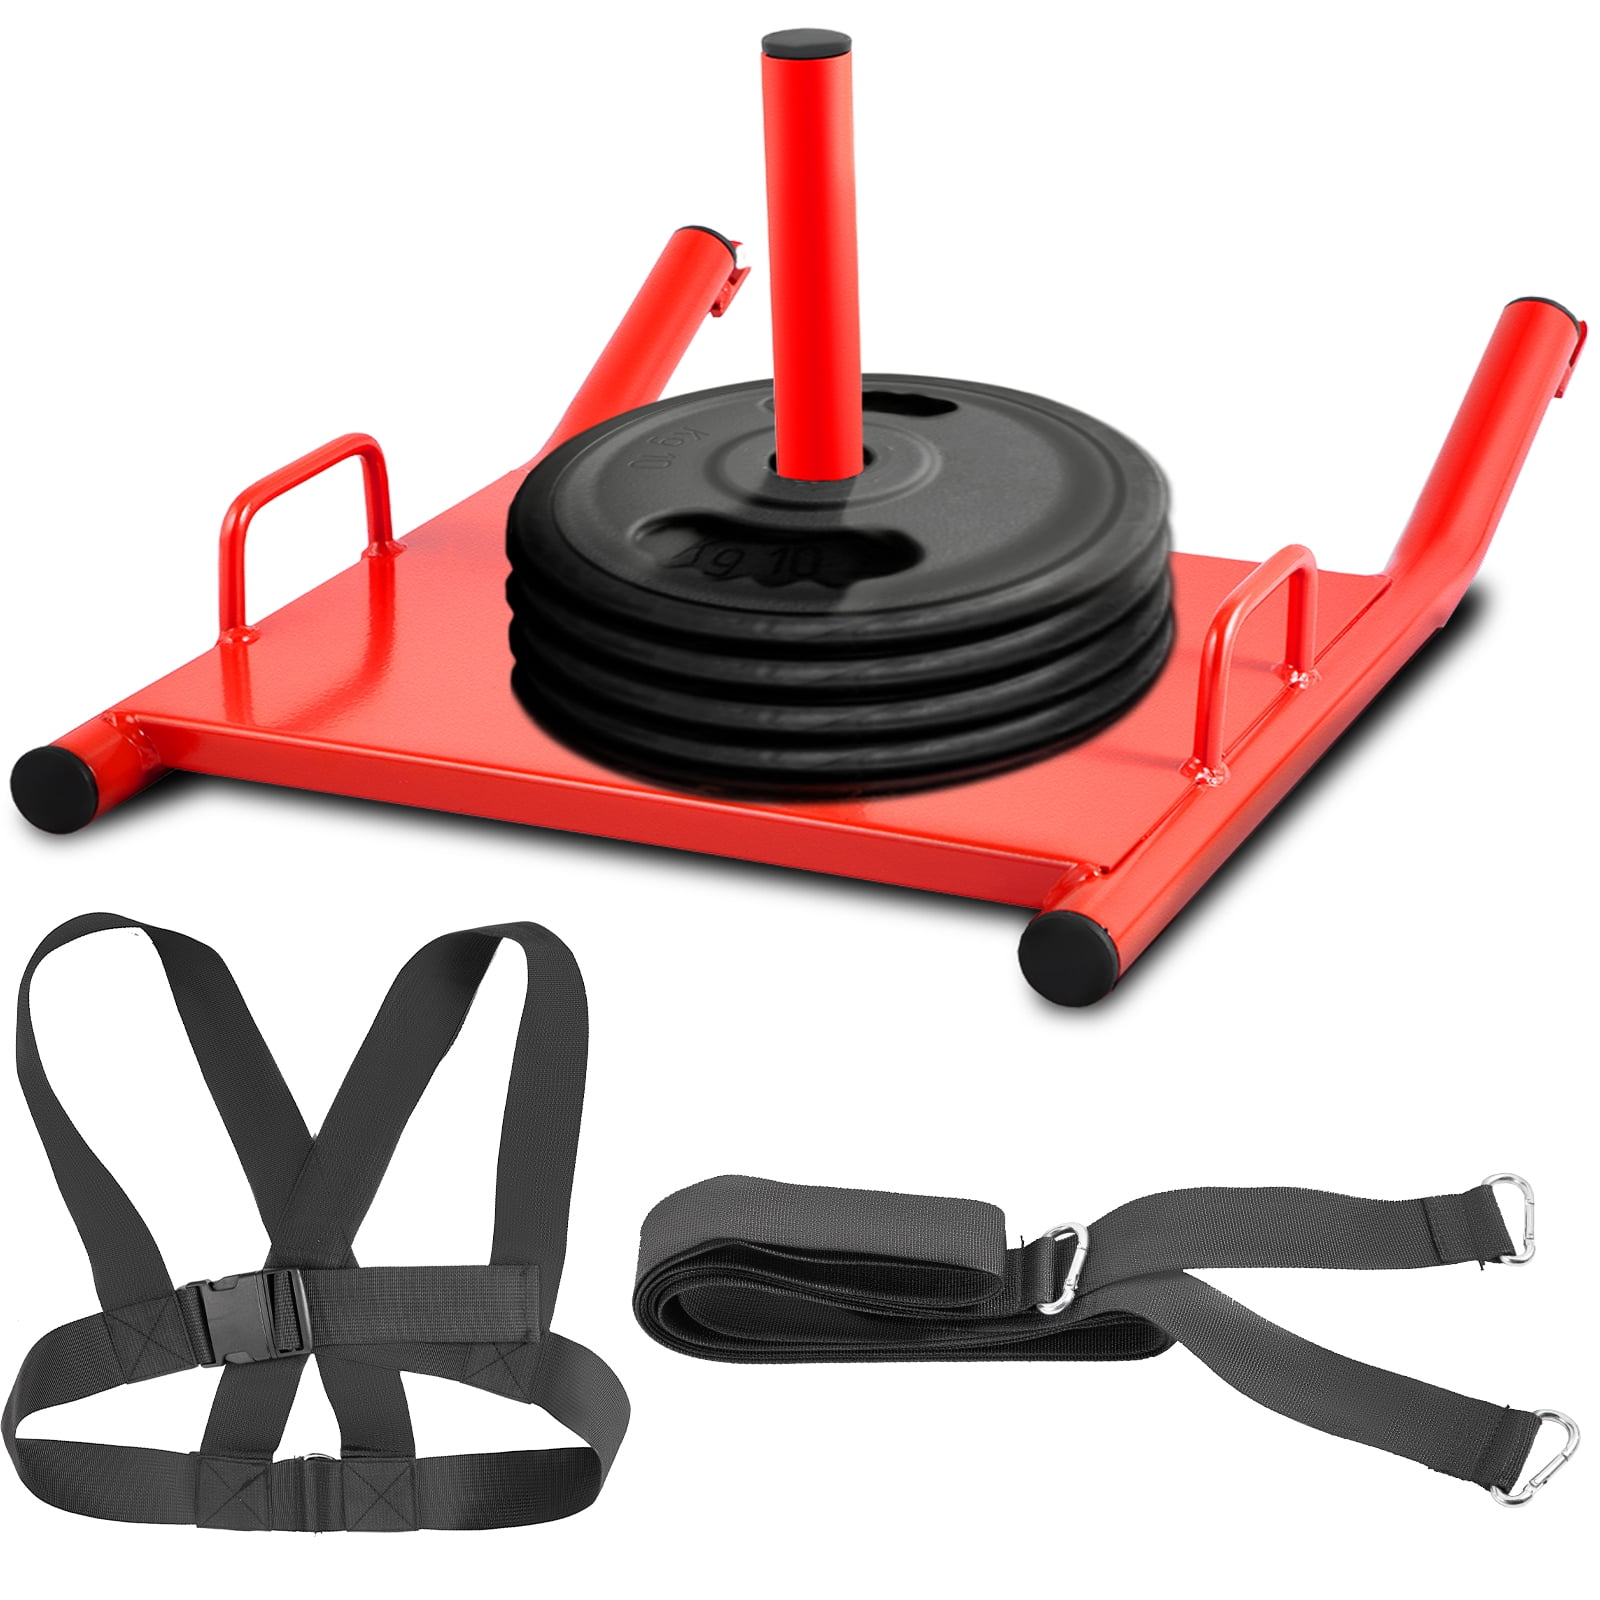 Equipment Shoulder Gym Weight Sled Pull Drag Training Workout Accessories Sport 